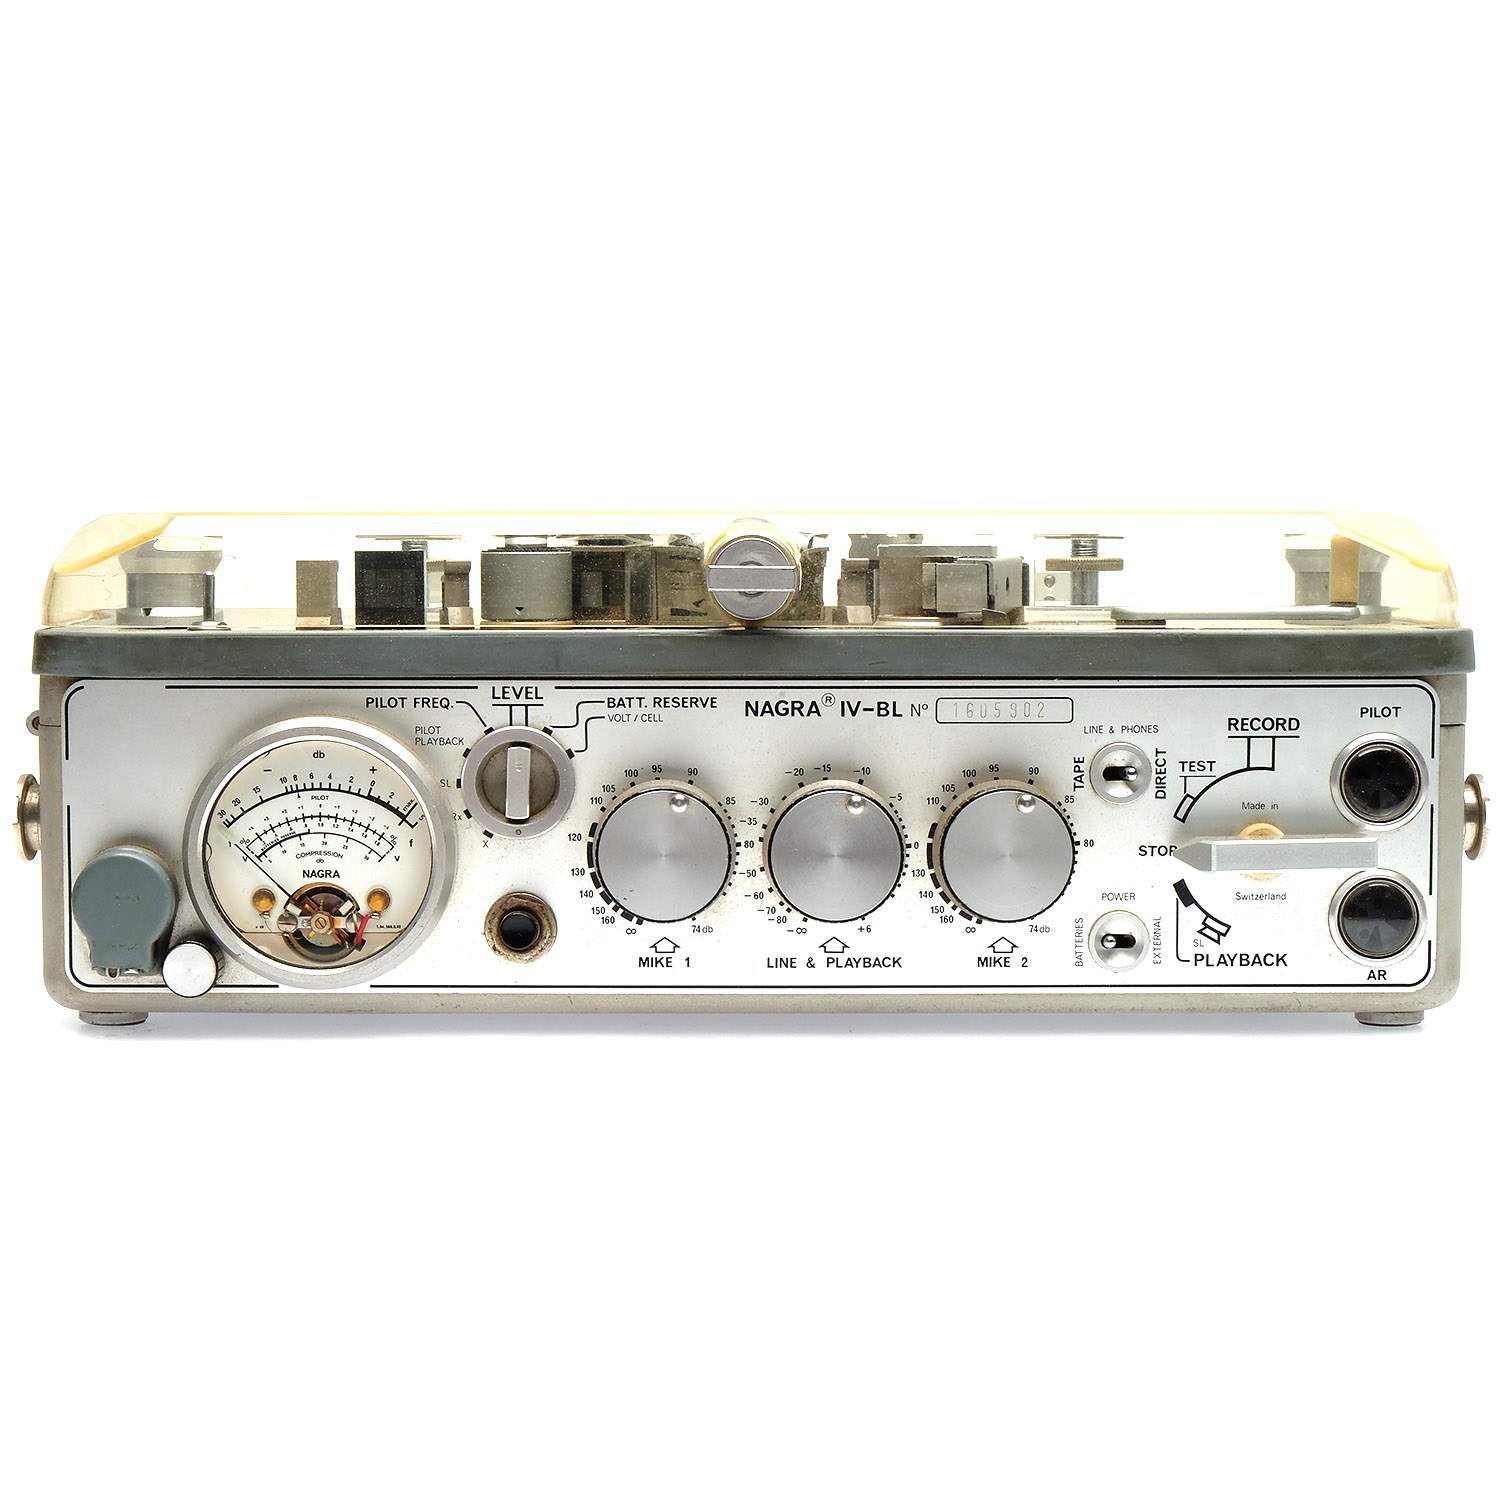 Nagra IV-BL, Case as-is 1605902 Main Image